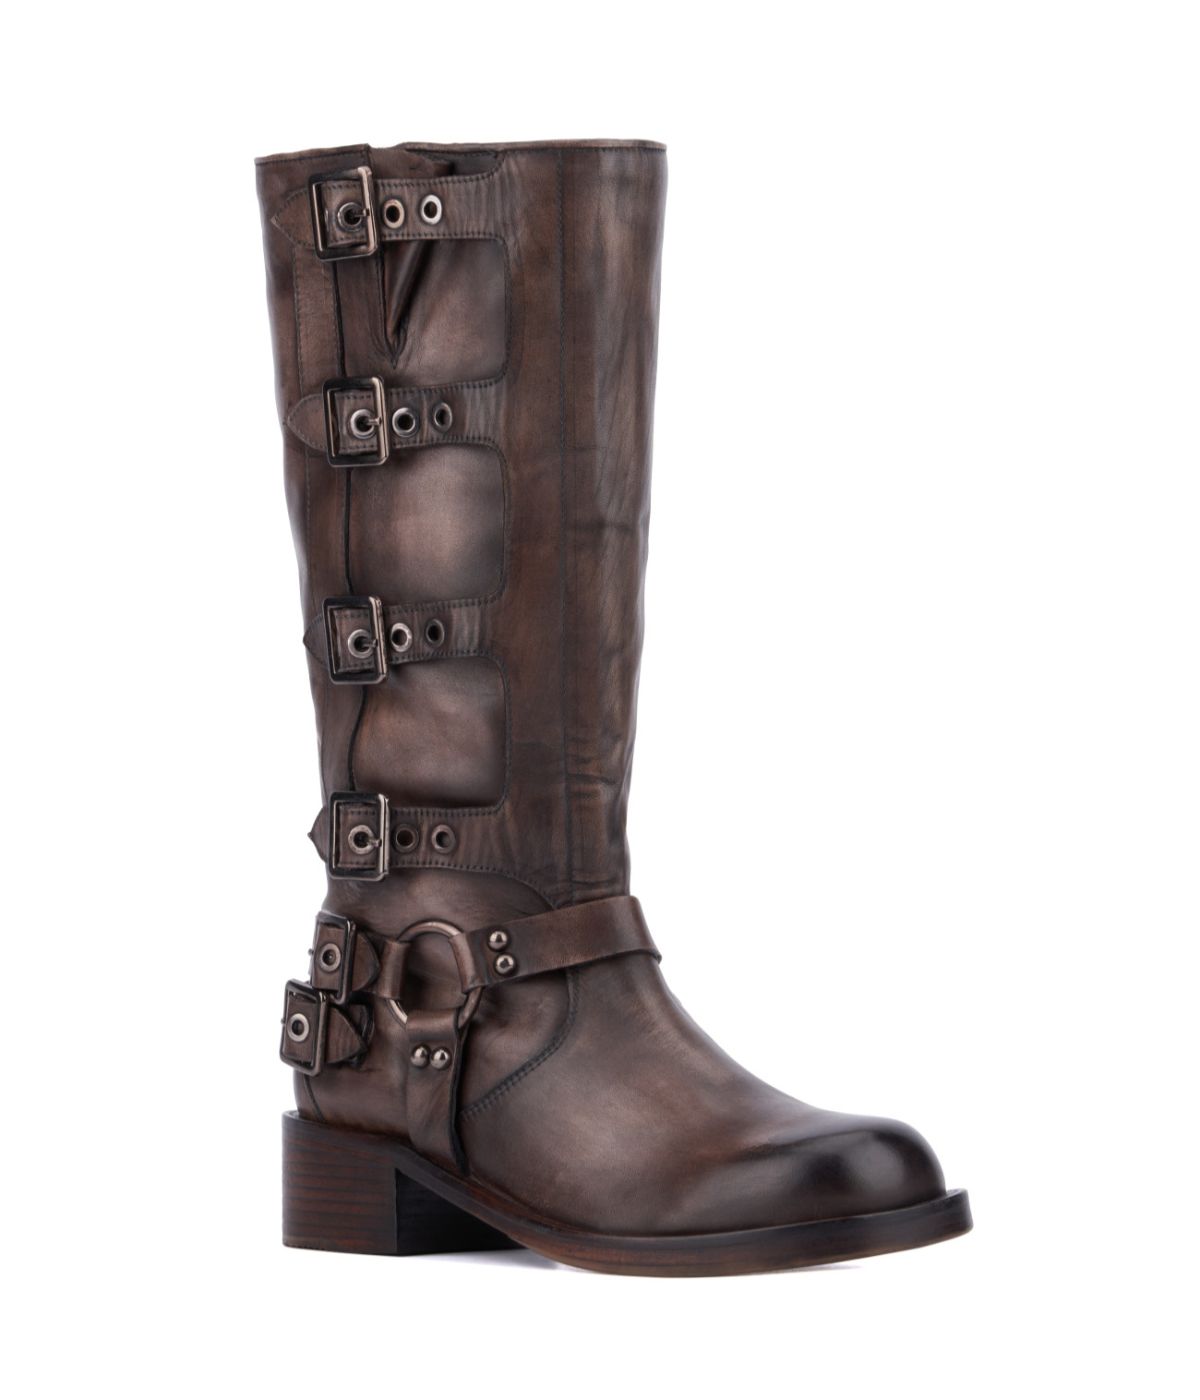 Vintage Foundry Co. Women's Constance Tall Boots Chocolate